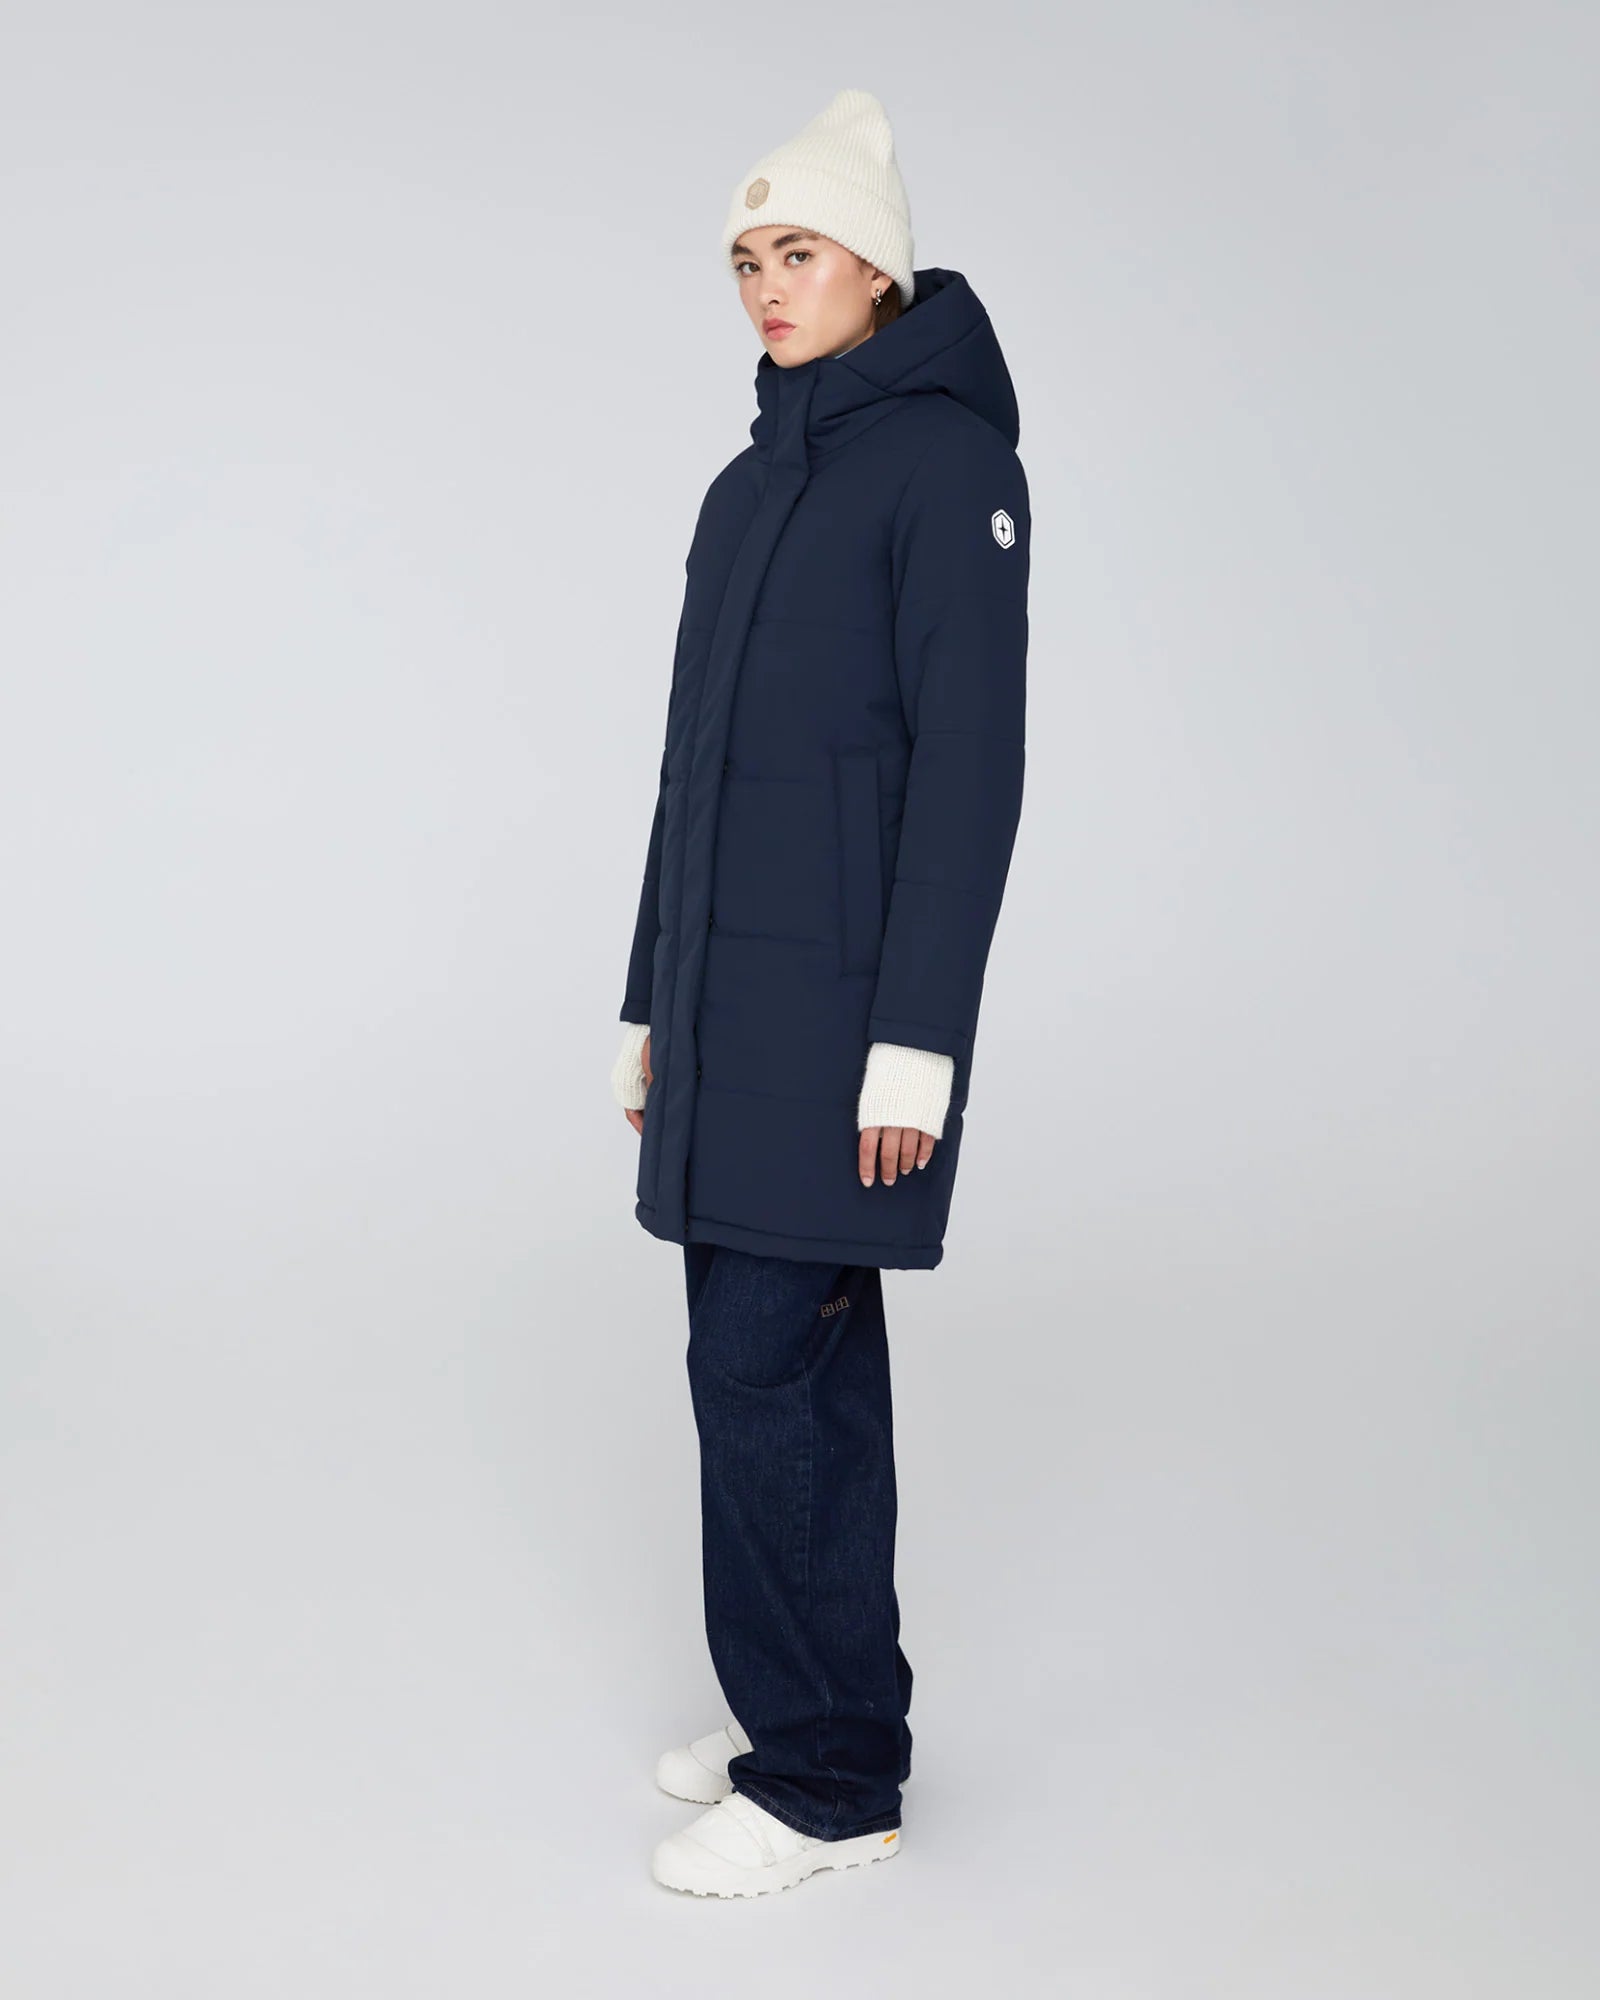 QUARTZ Co MADELINE - Hooded Insulated Winter Jacket - Boutique Bubbles